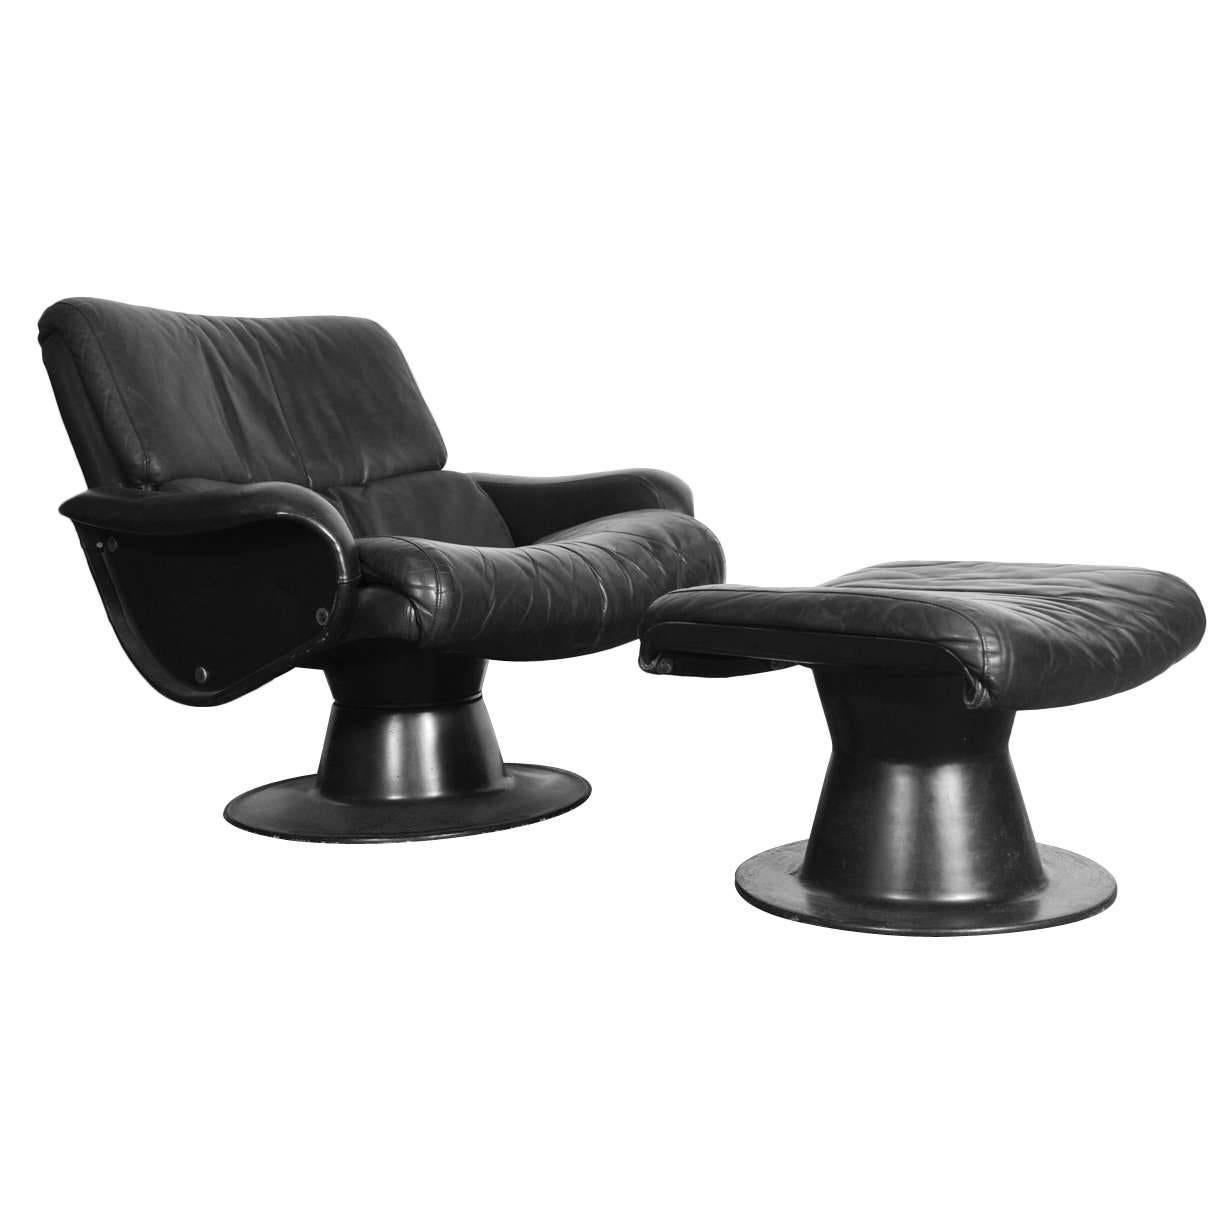 Very rare smooth black leather chair with ottoman by Finnish designer Yrjo Kukkapuro. Designer name marked in the base.
Reinforced plastic, leather.